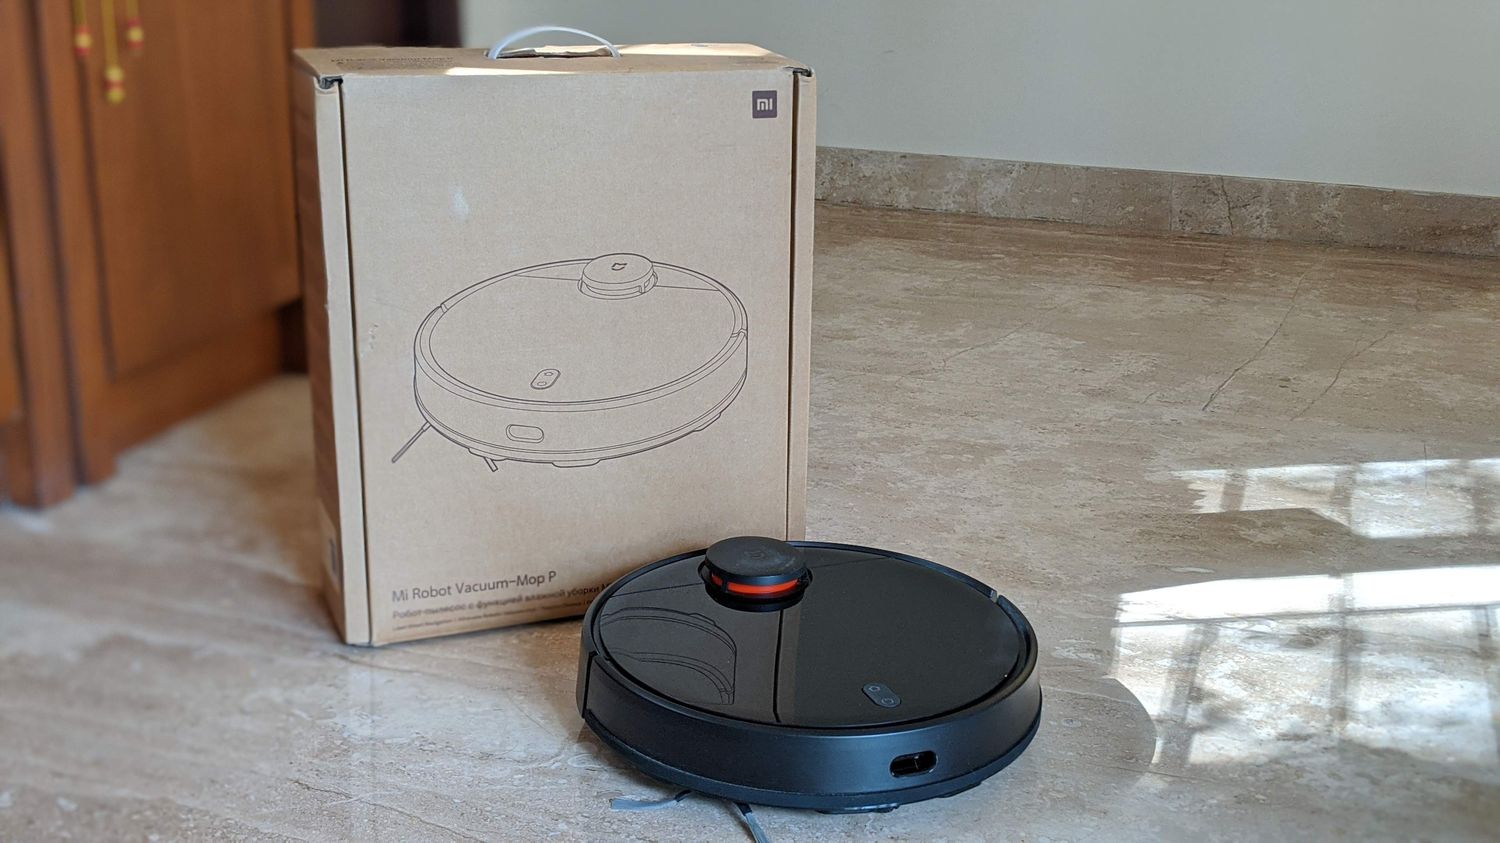 how-to-add-xiaomi-vacuum-to-mi-home